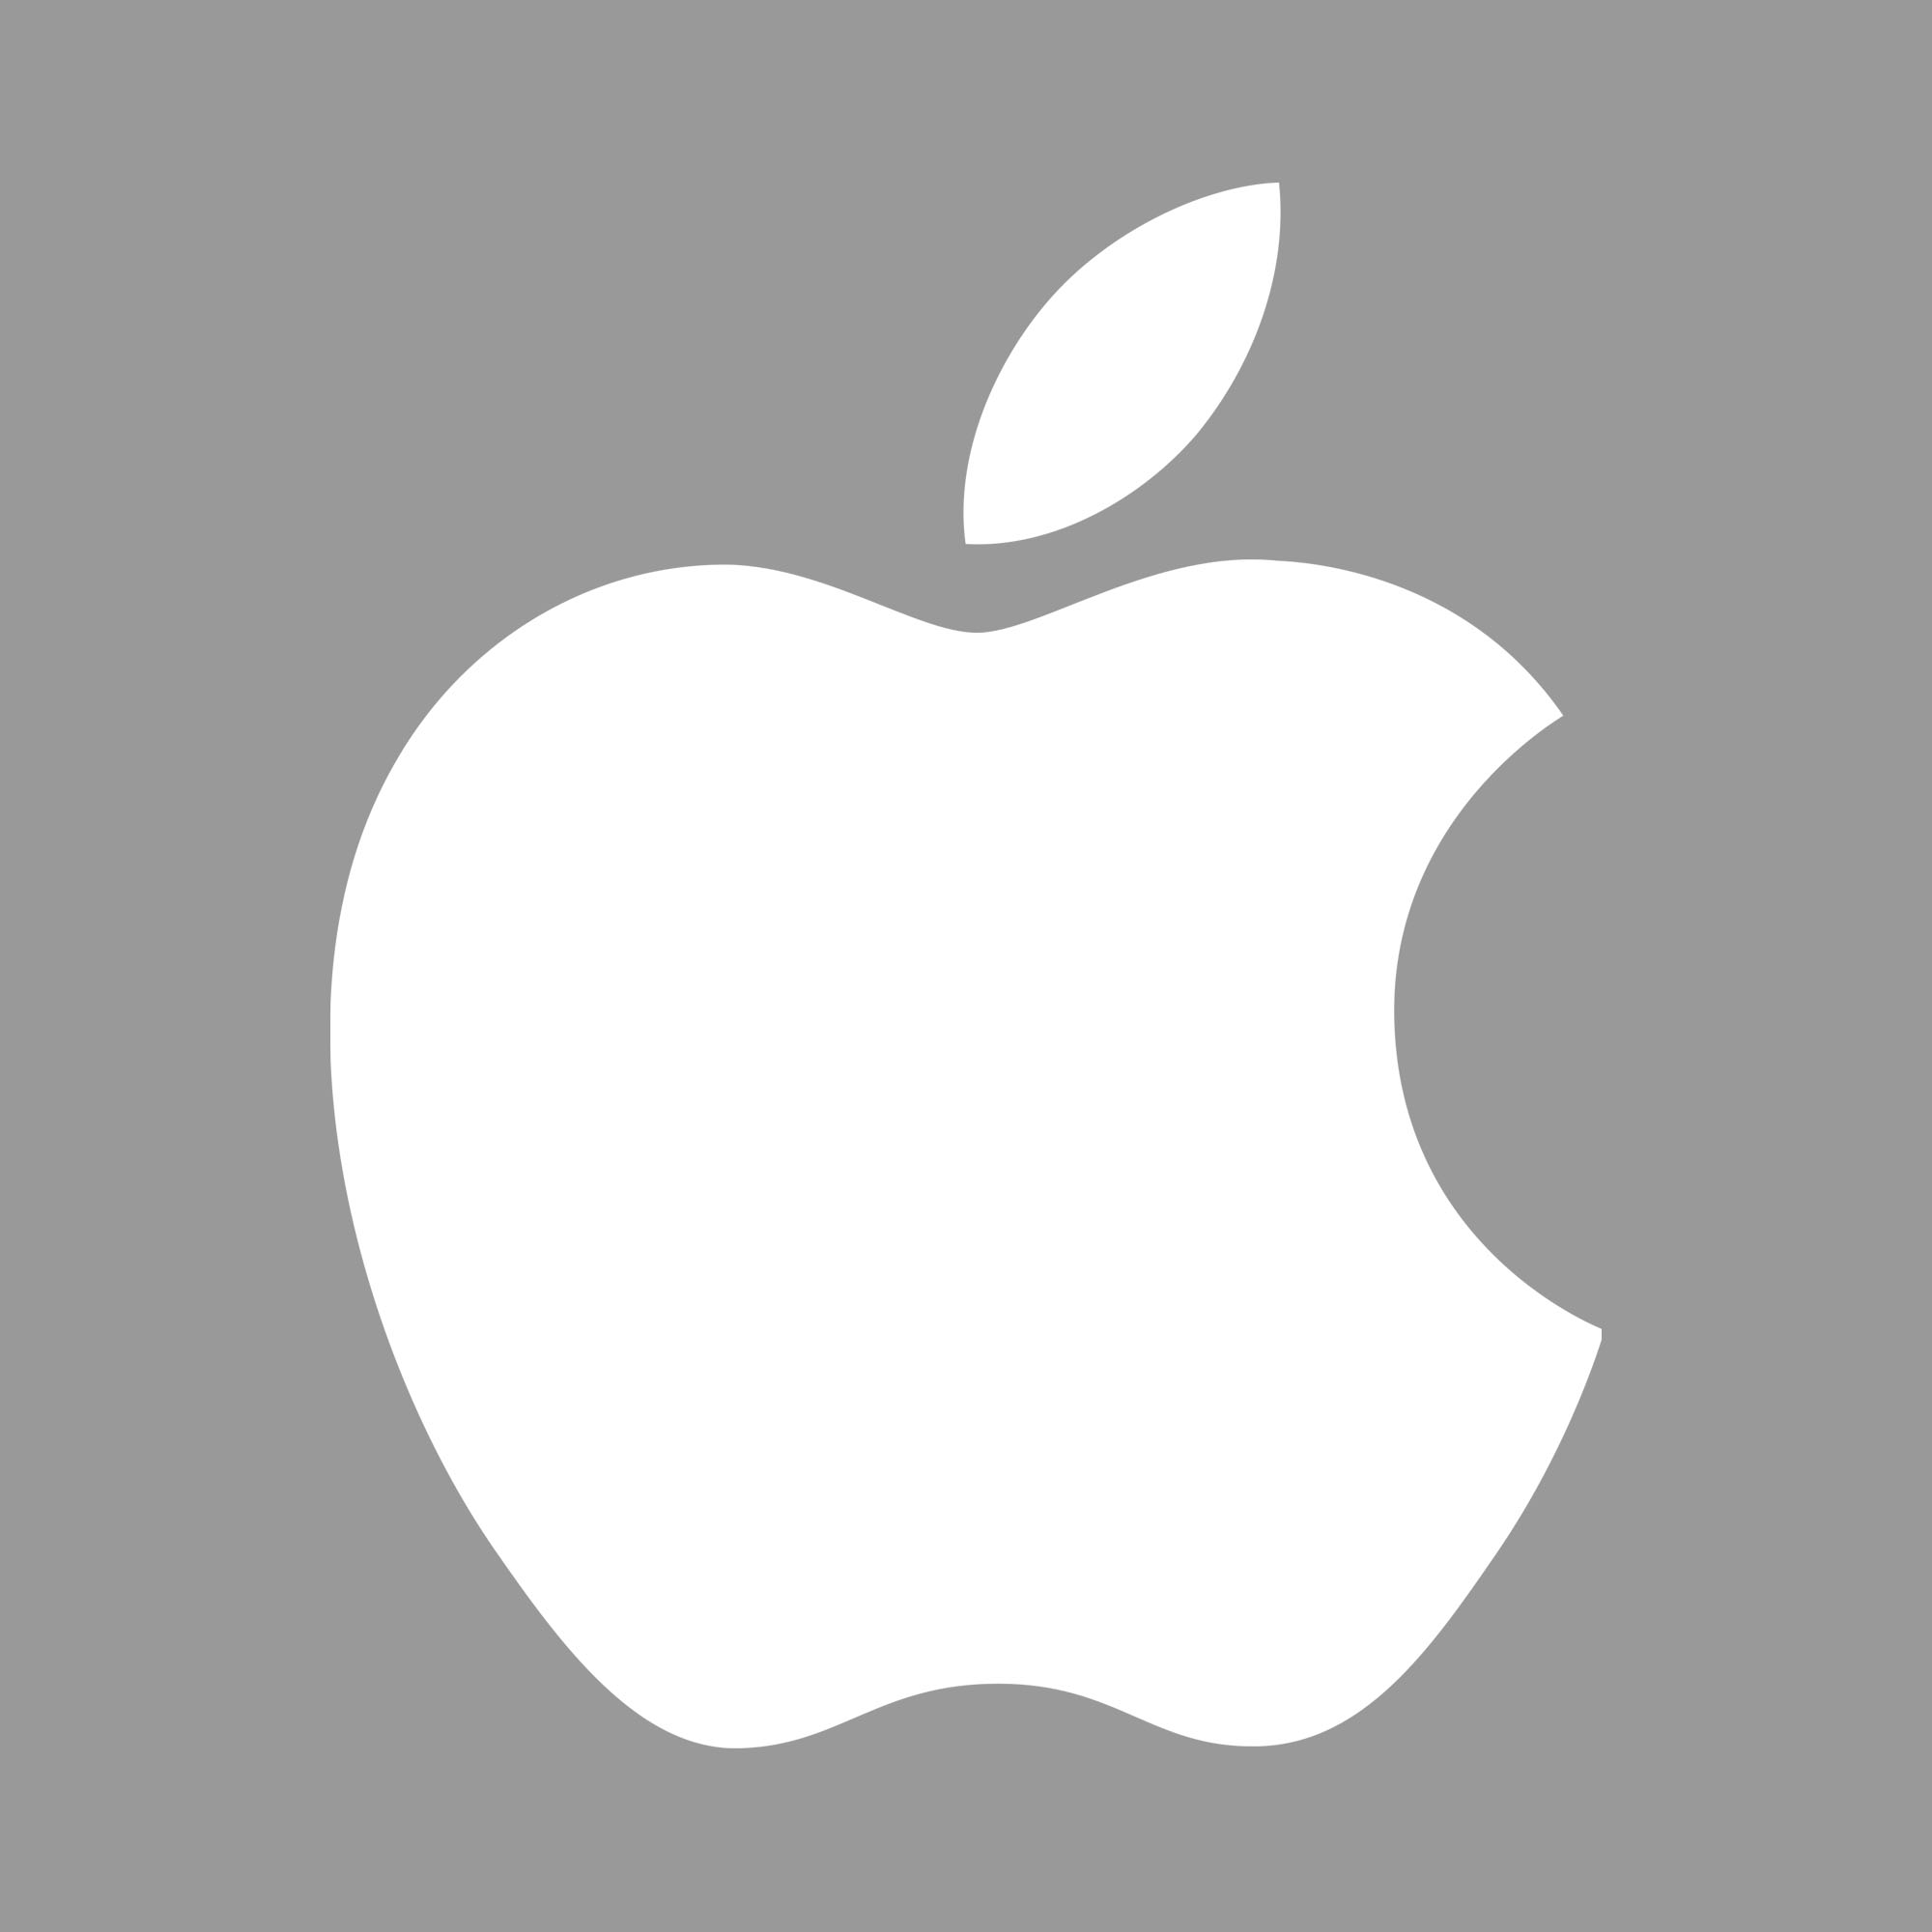 A picture of the apple logo